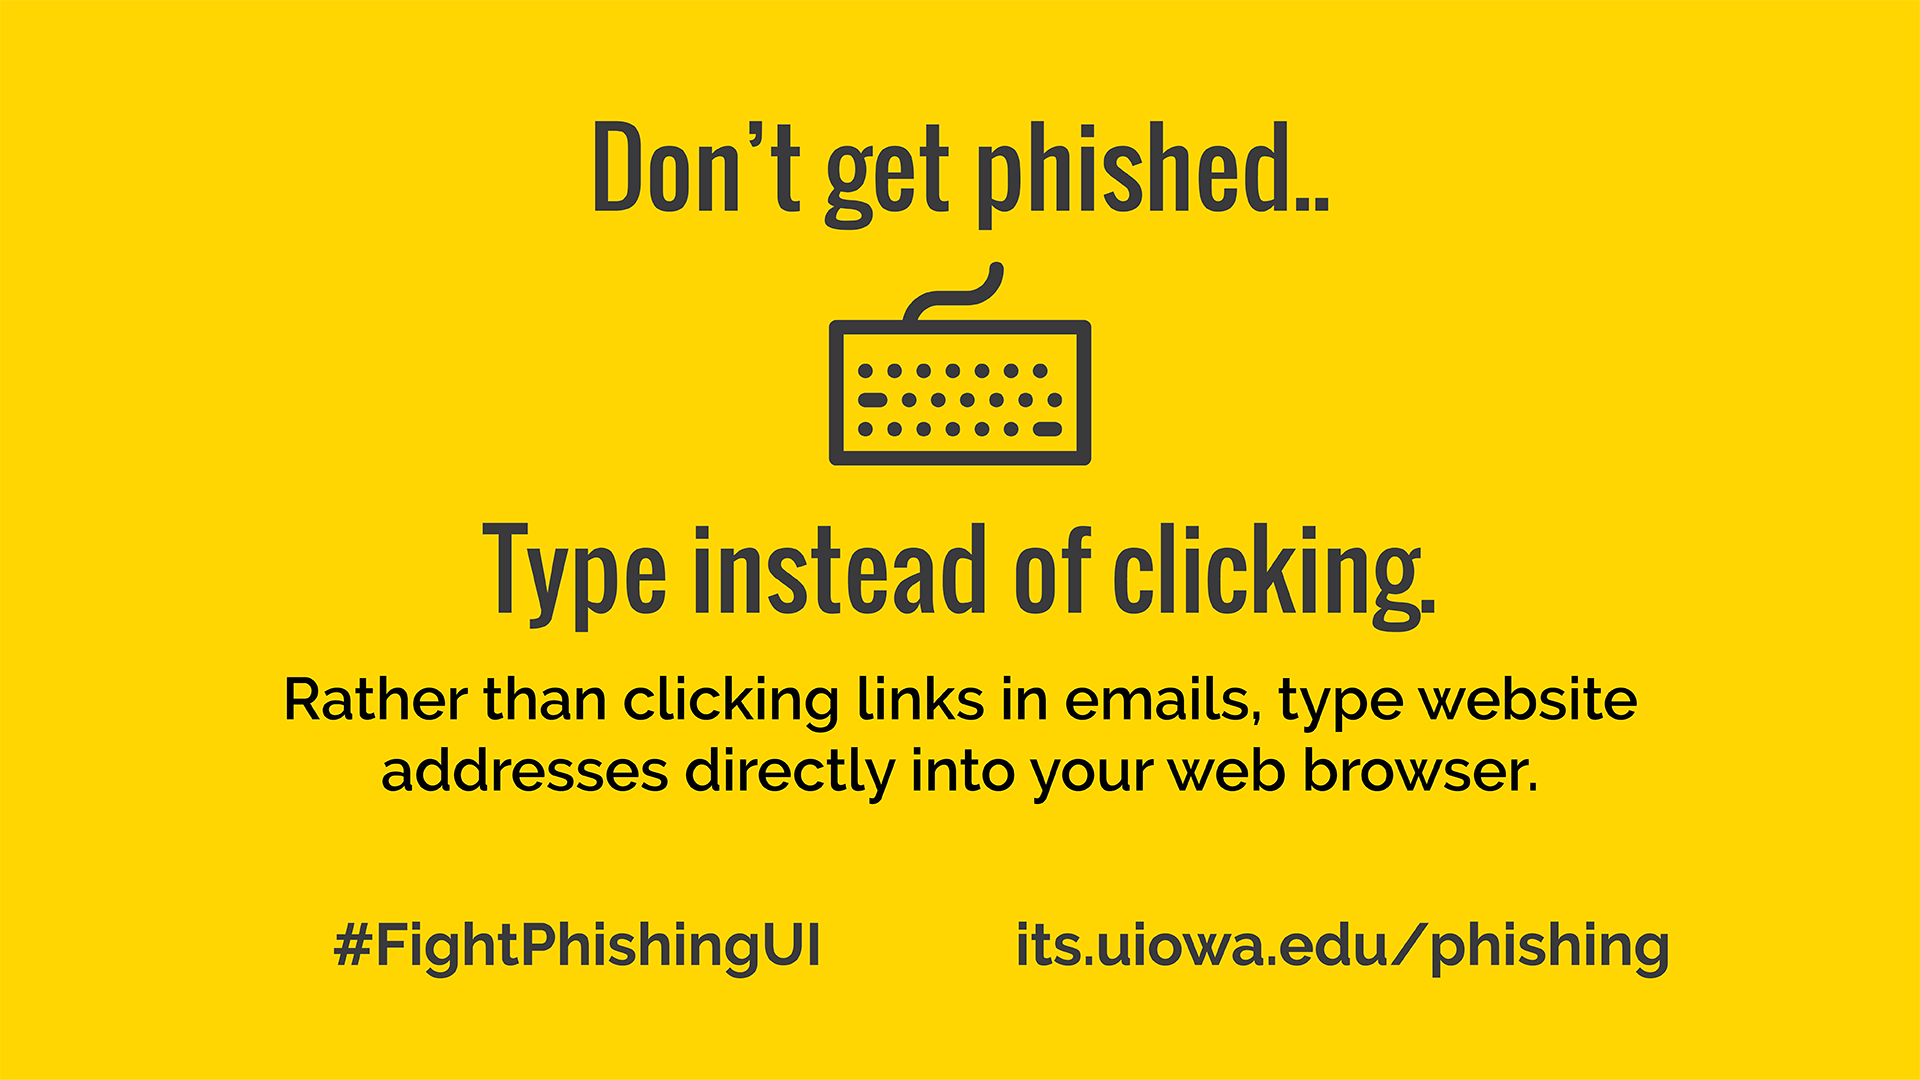 Don't get phished.. type instead of clicking. Rather than clicking links in emails, type website addresses directly into your web browser. #FightPhishingUI its.uiowa.edu/phishing